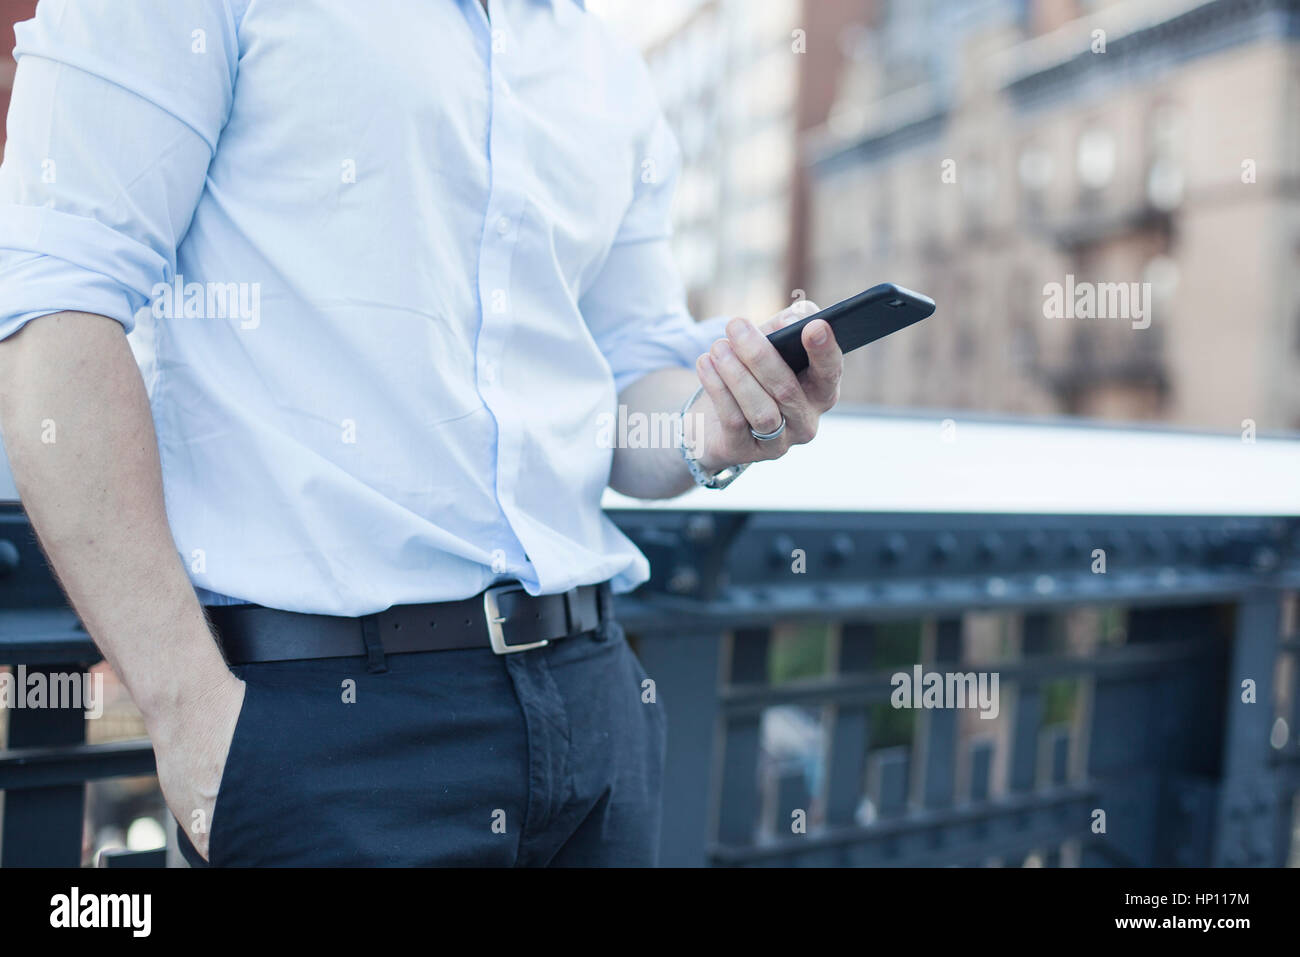 Businessman holding smartphone, mid section Stock Photo